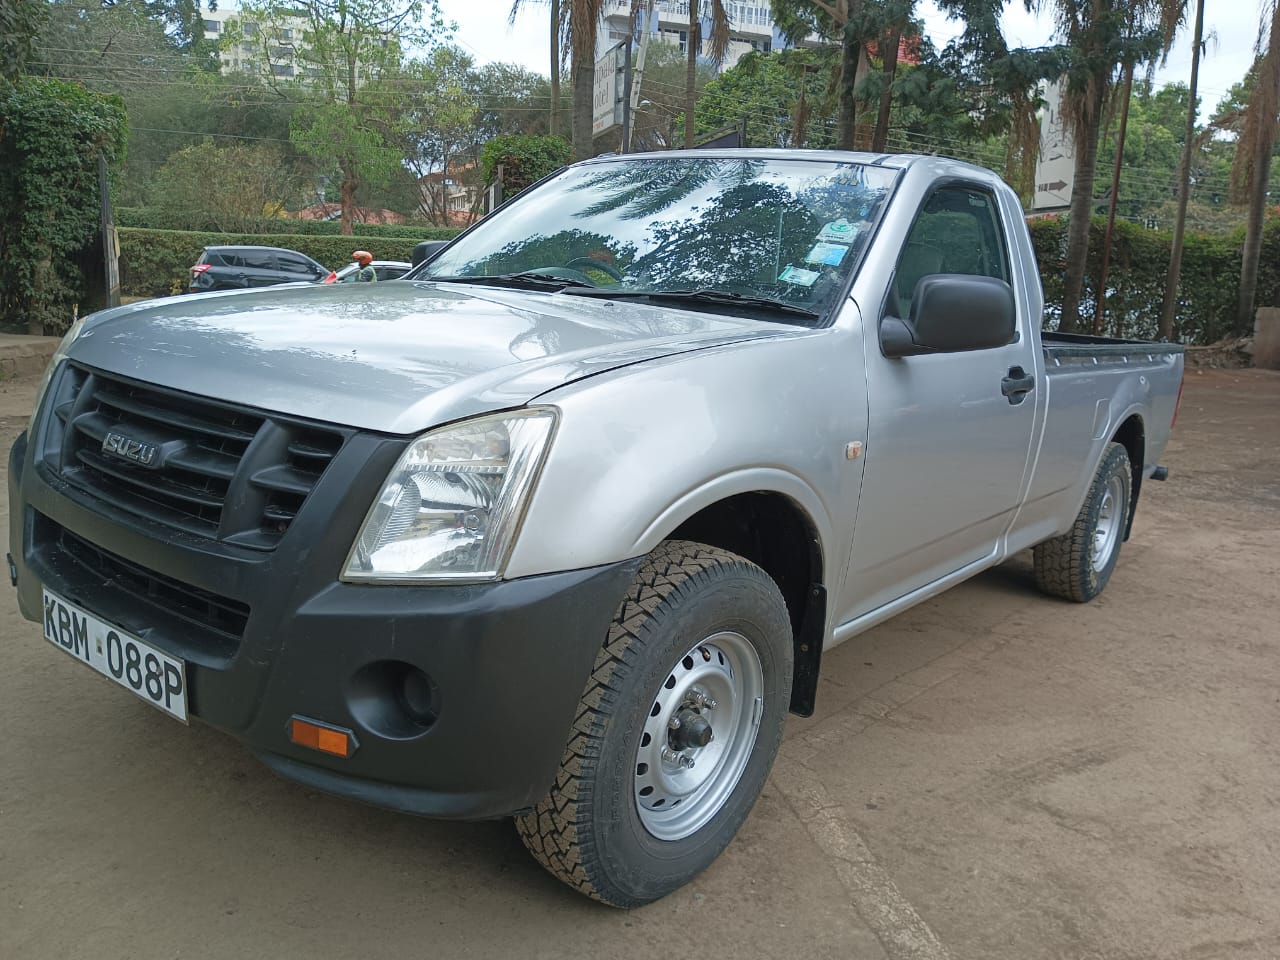 Isuzu D-max 2010 local assembly Exclusive